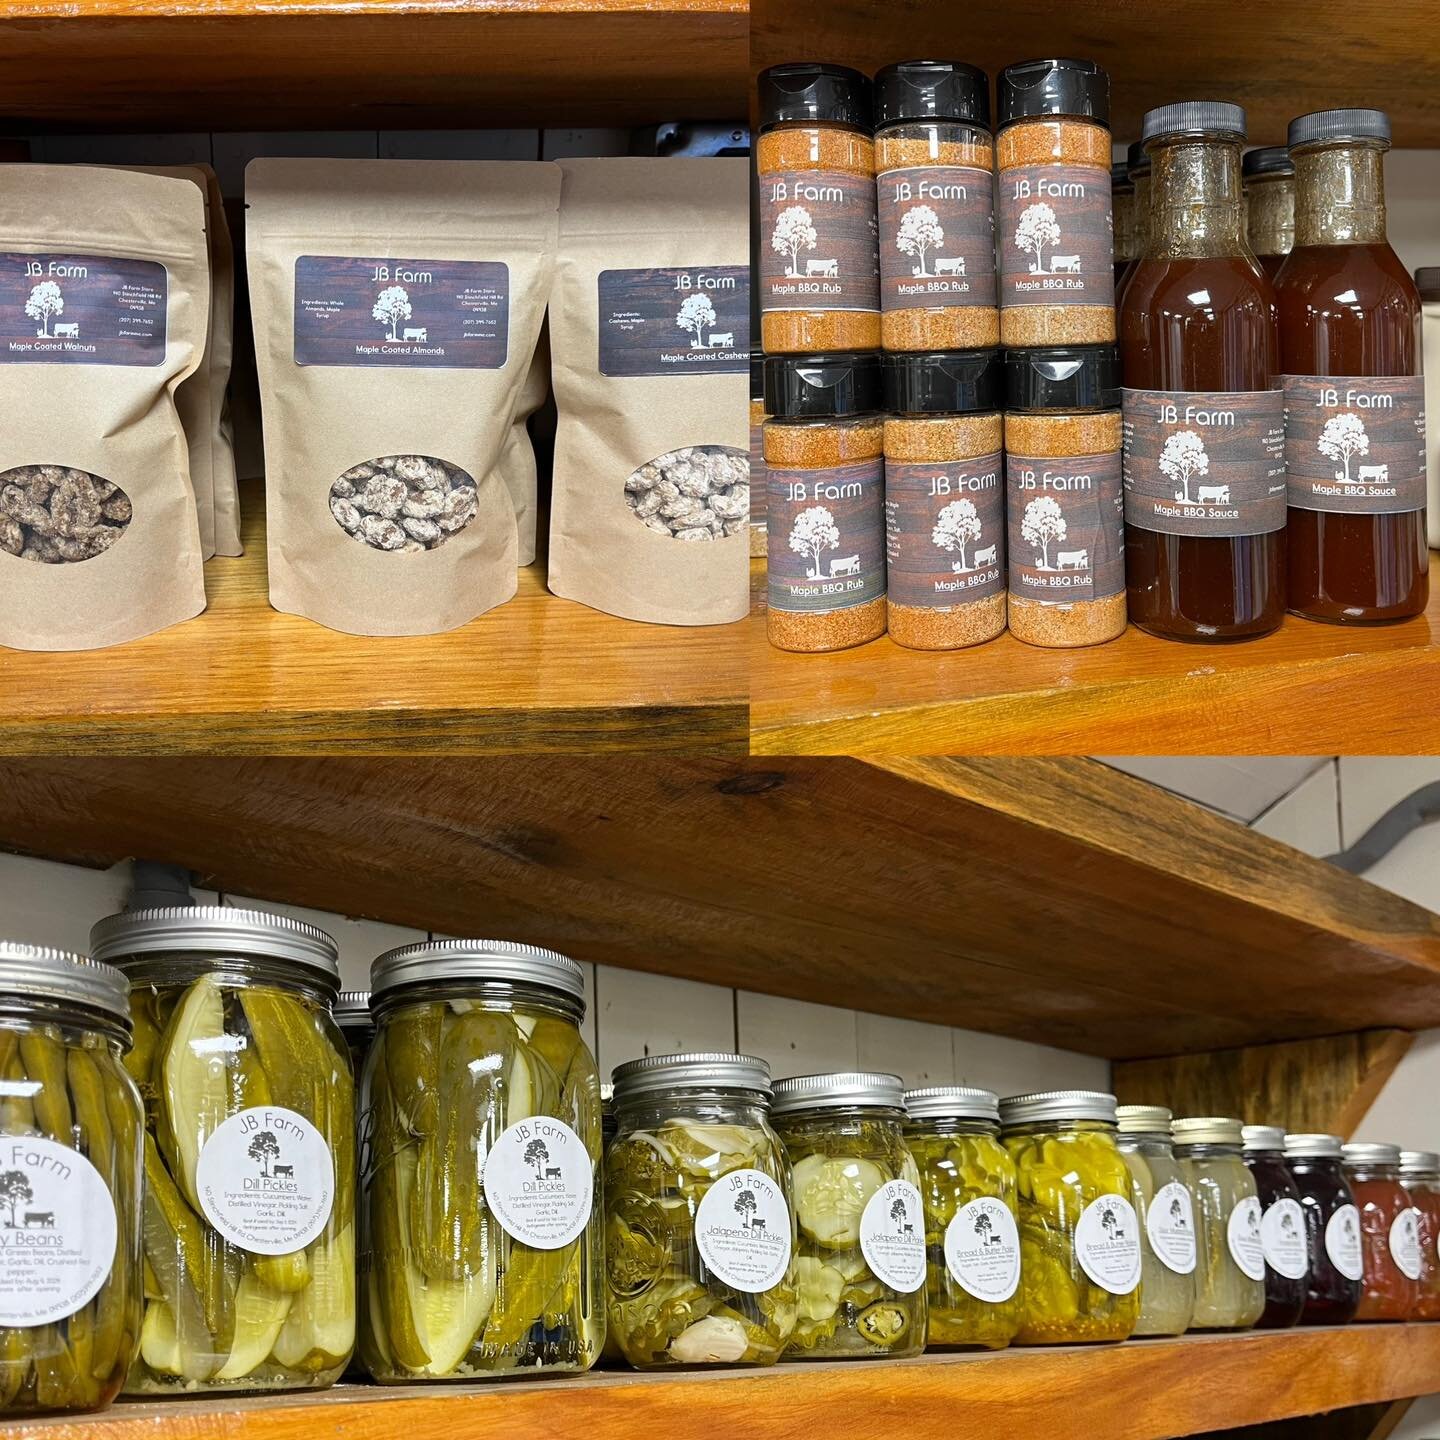 We&rsquo;re open 8-1 today and tomorrow be sure to stop by if you&rsquo;re looking for something yummy to ring in the new year 🥳
🫙We have a variety of homemade pickles, jams, and salsa! 
🍁For something to sweeten up your new year celebration we ha